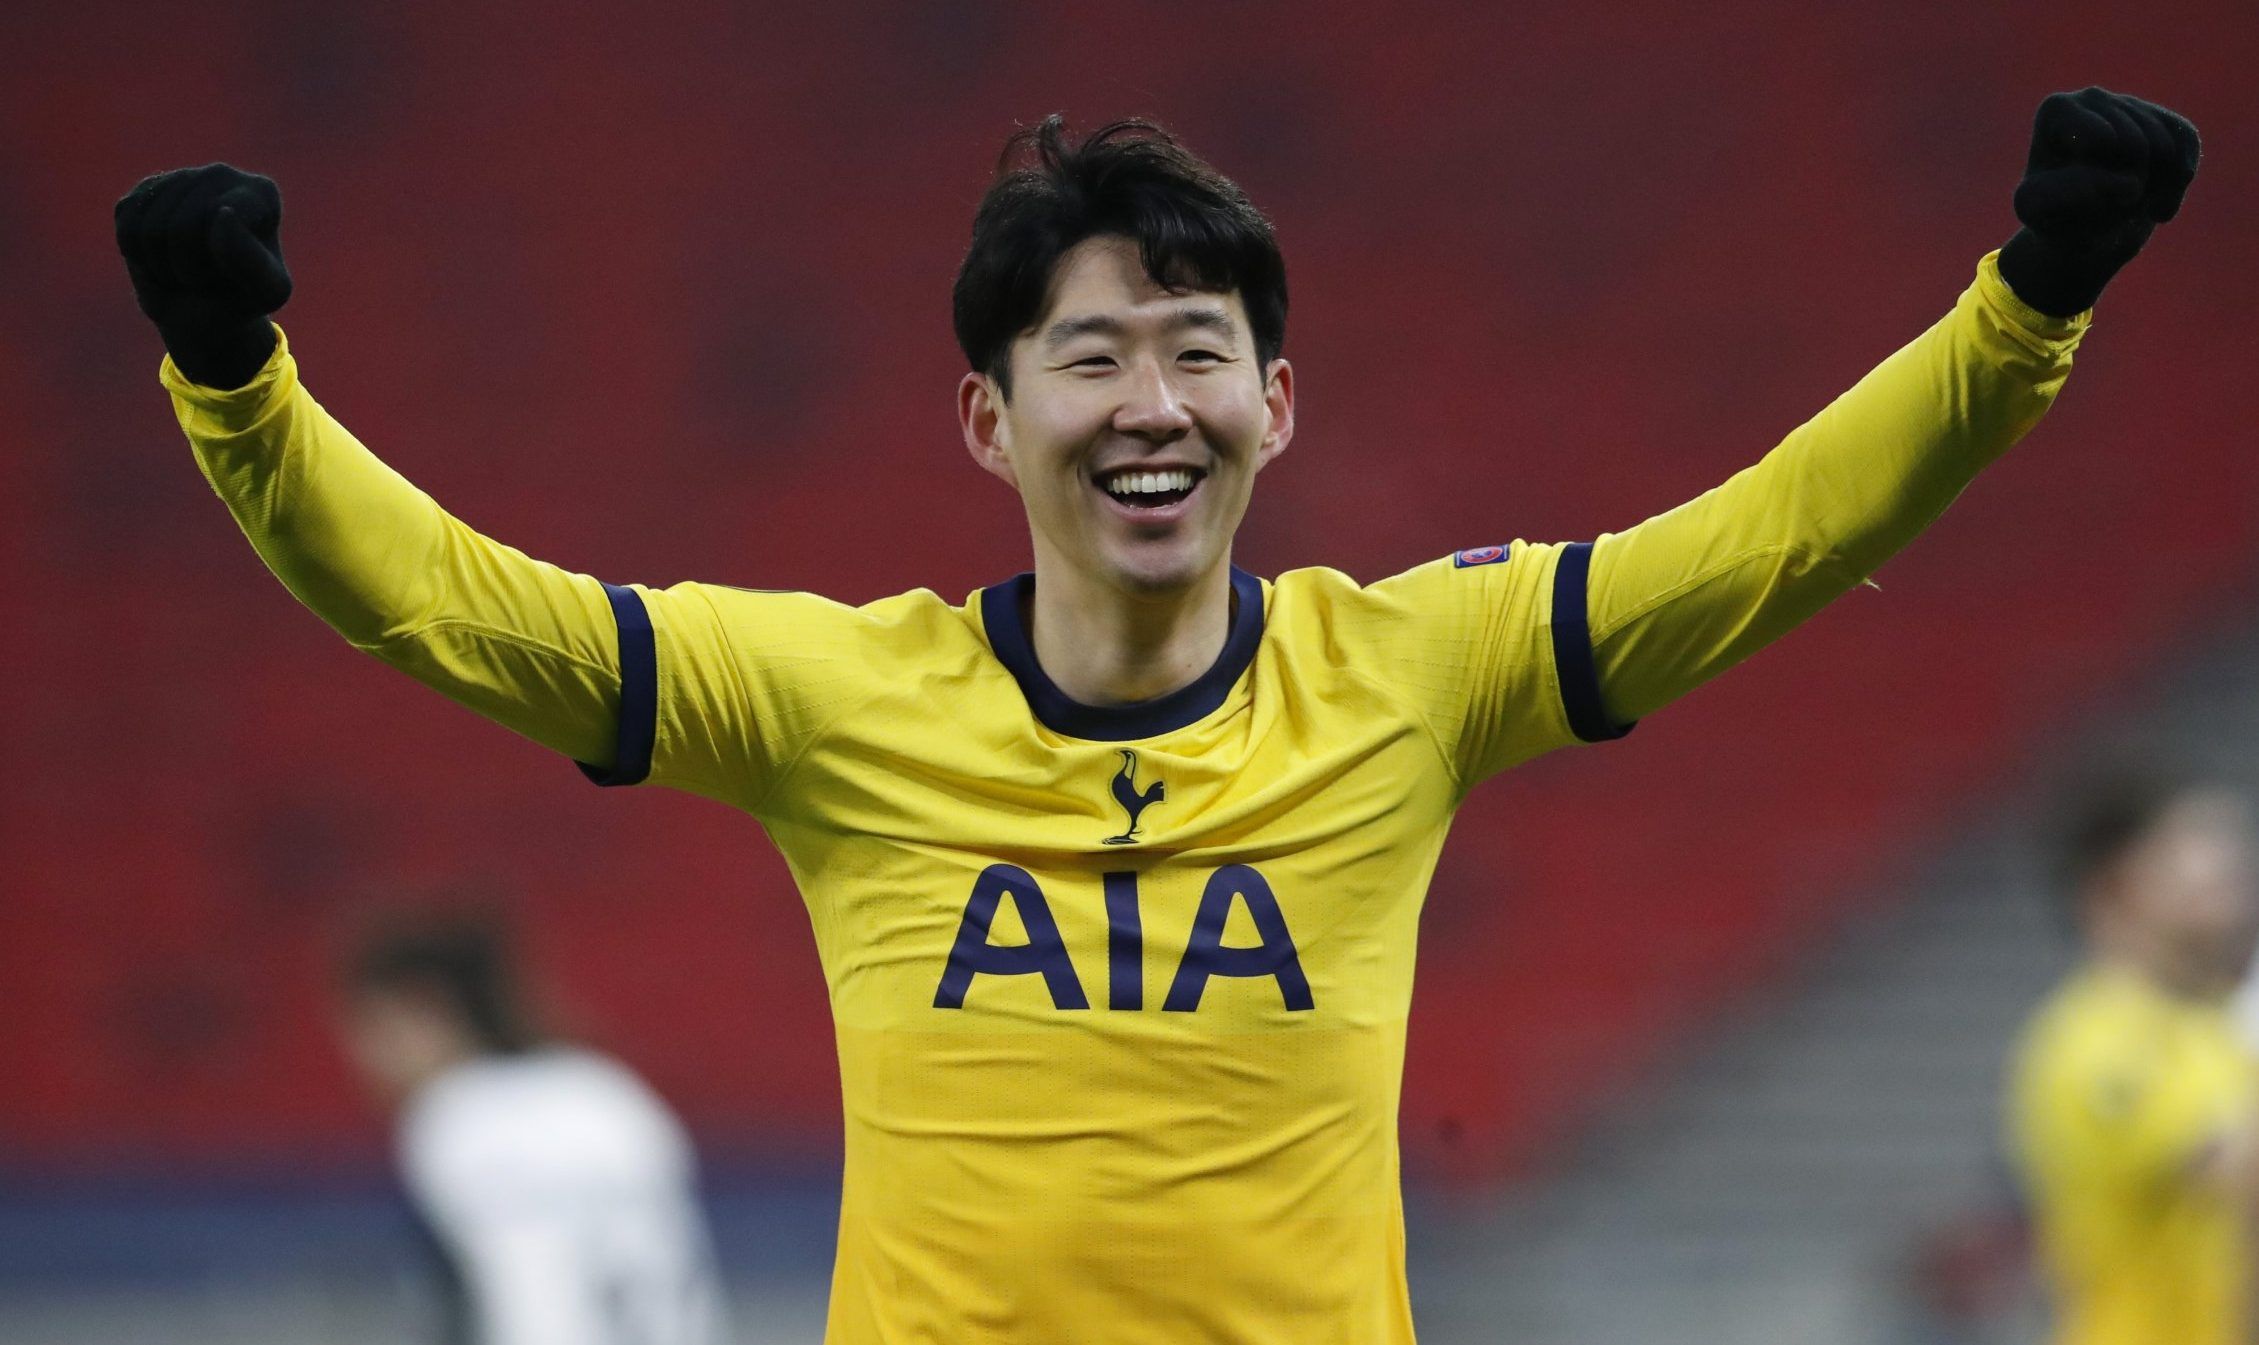 spurs forward heung-min son celebrates scoring against wolfsberger in the europa league